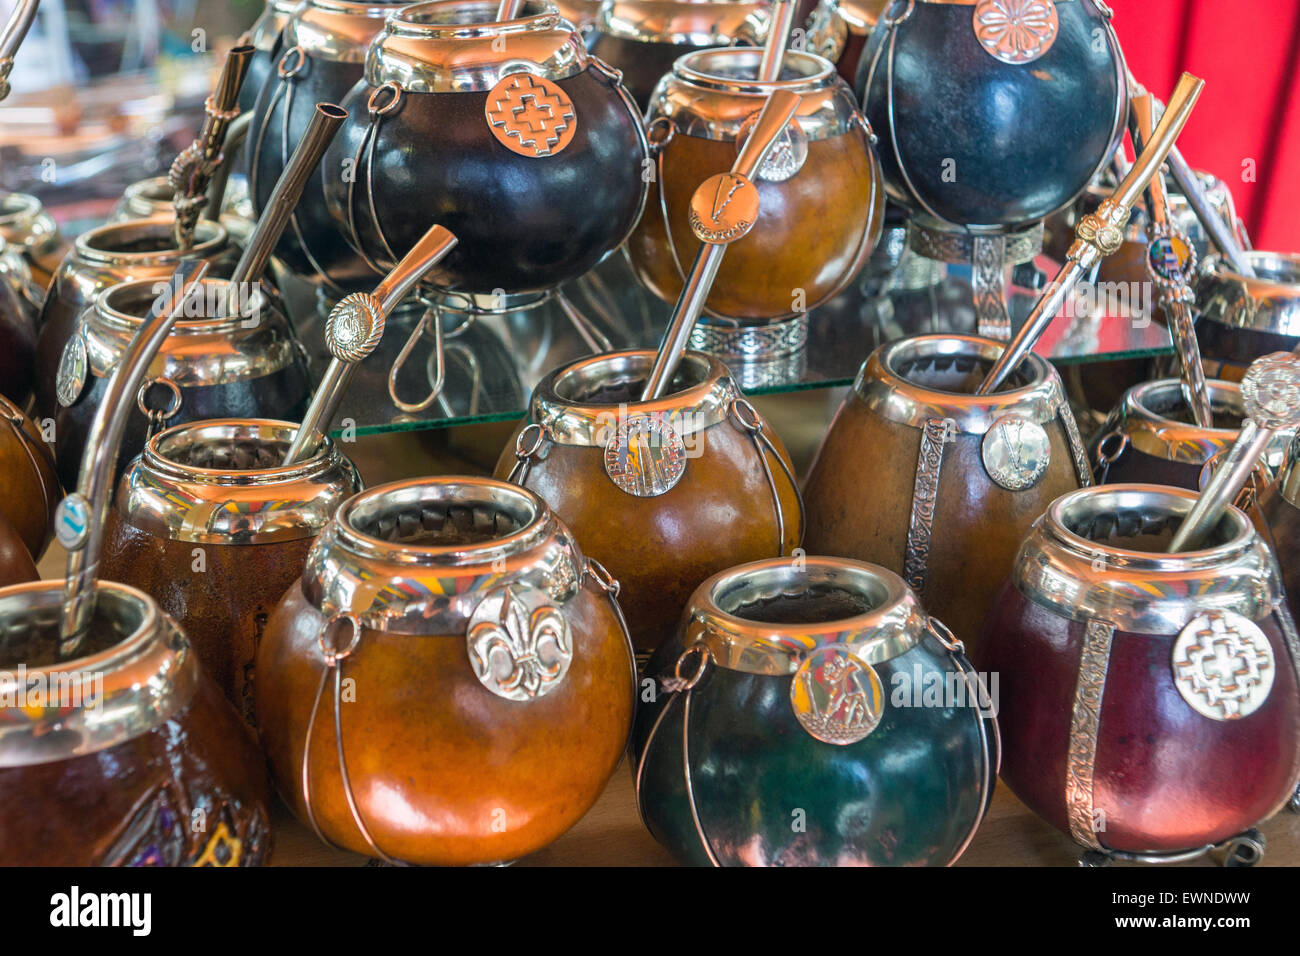 A selection of calabash mate cups seen in Argentina Stock Photo